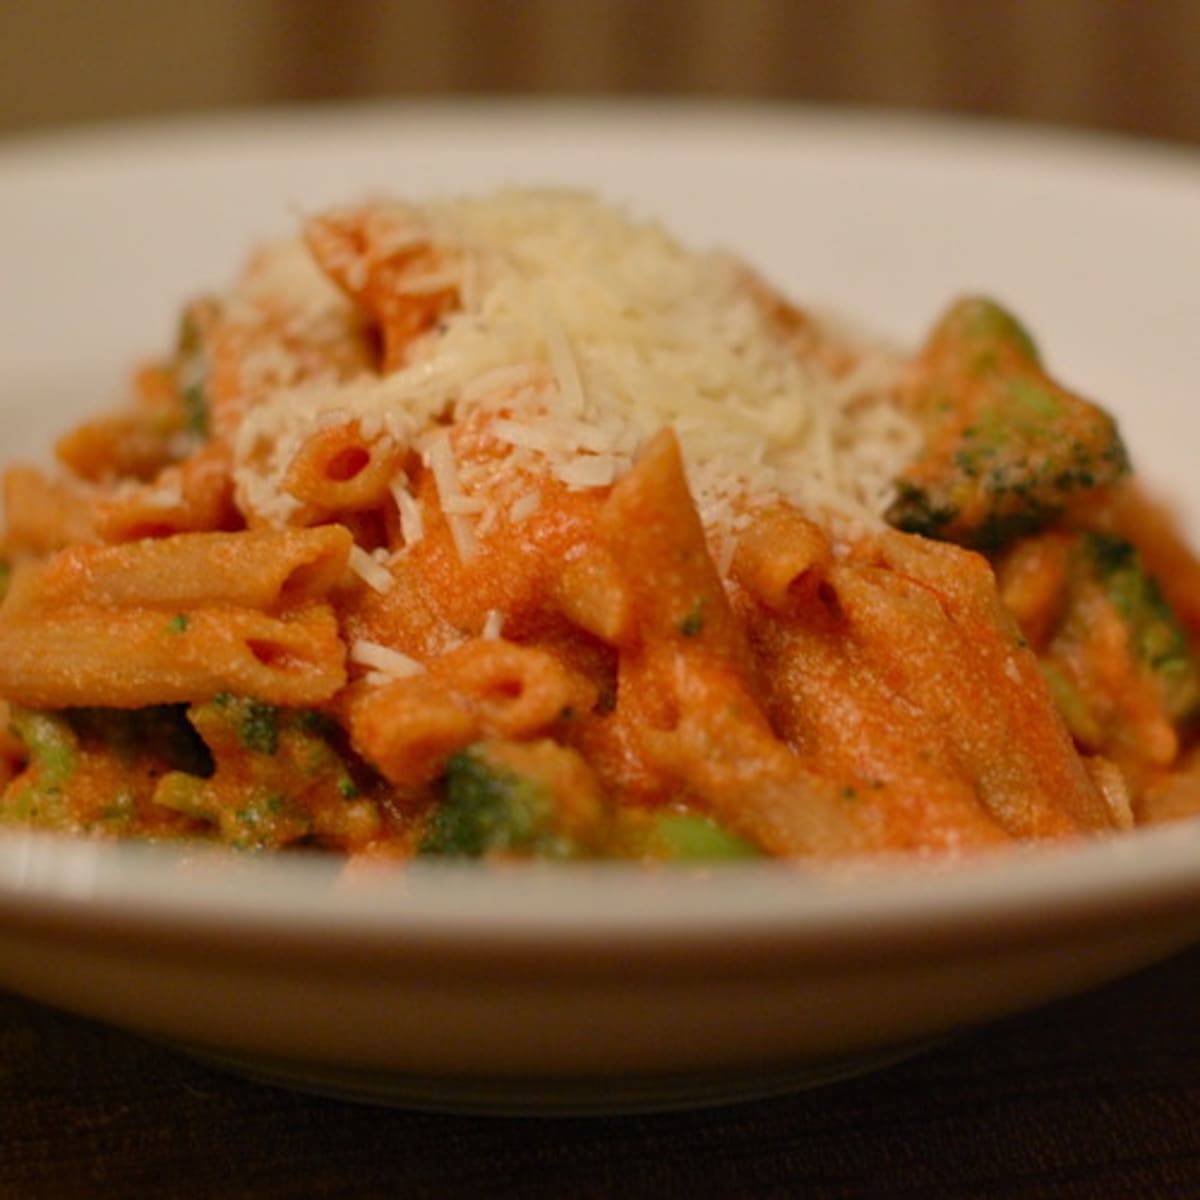 Tomato Ricotta Pasta with Broccoli and cheese in a bowl.